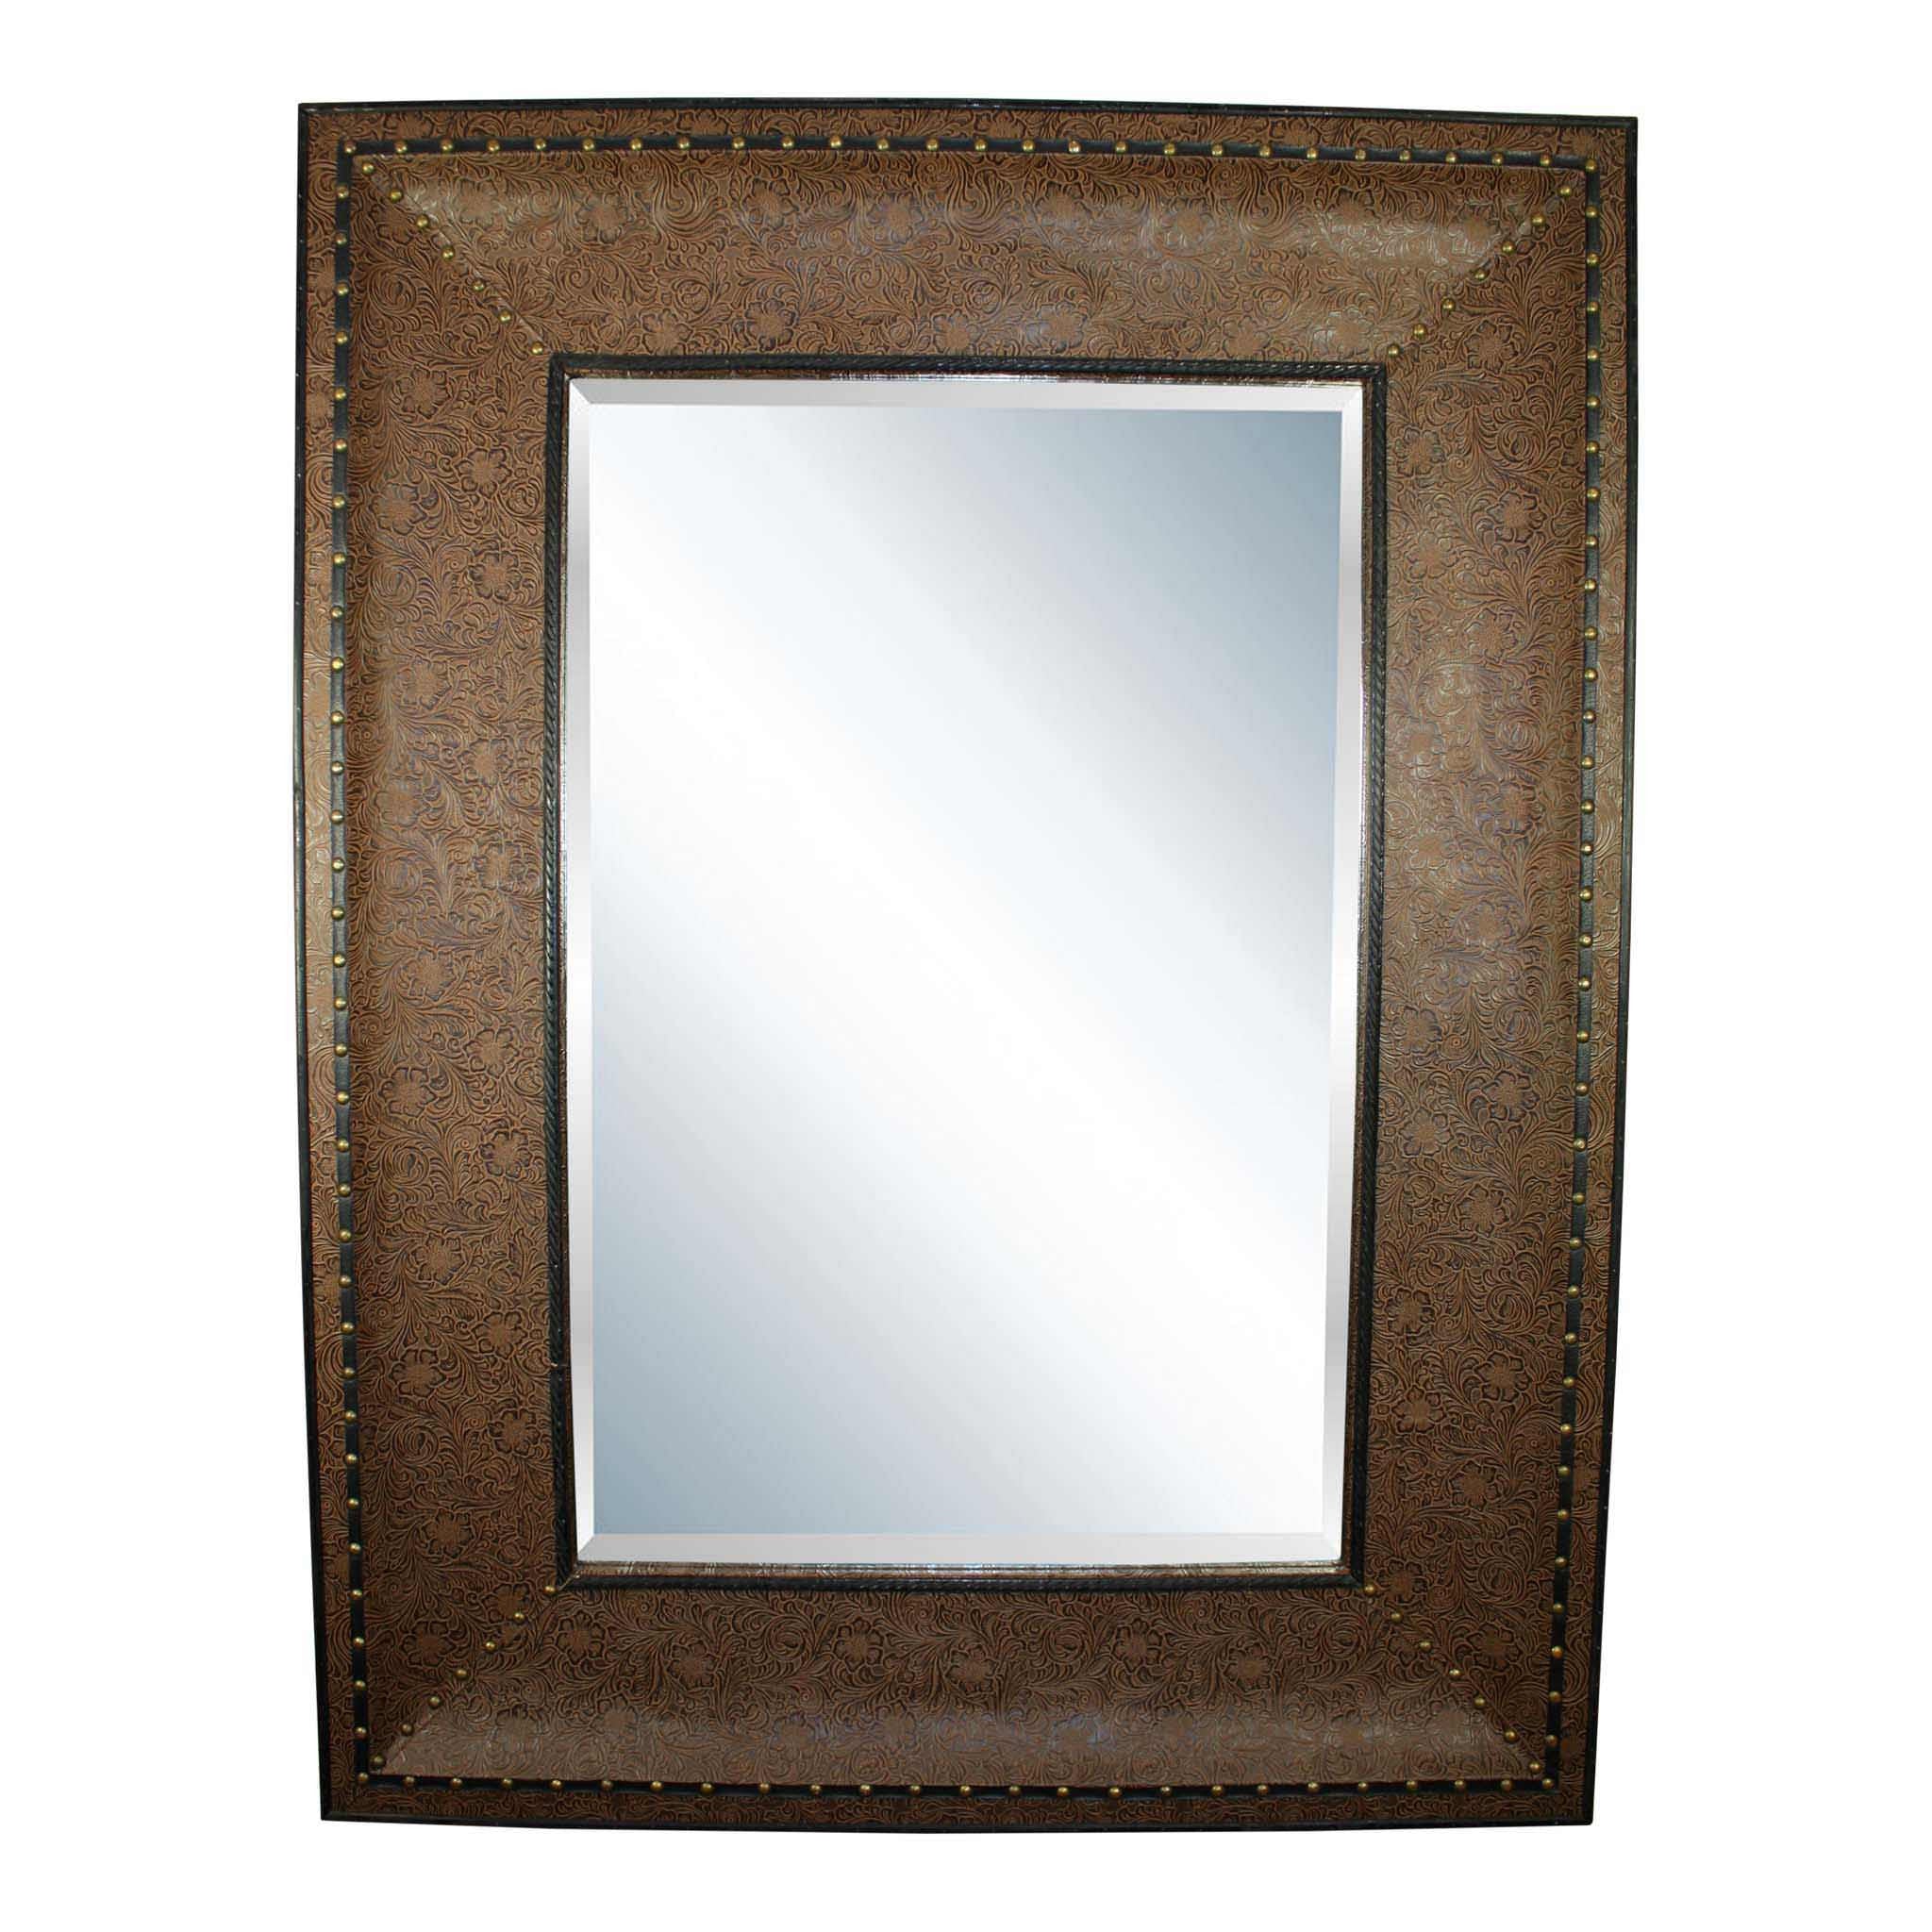 Mirror with Embossed Brown Leather Frame